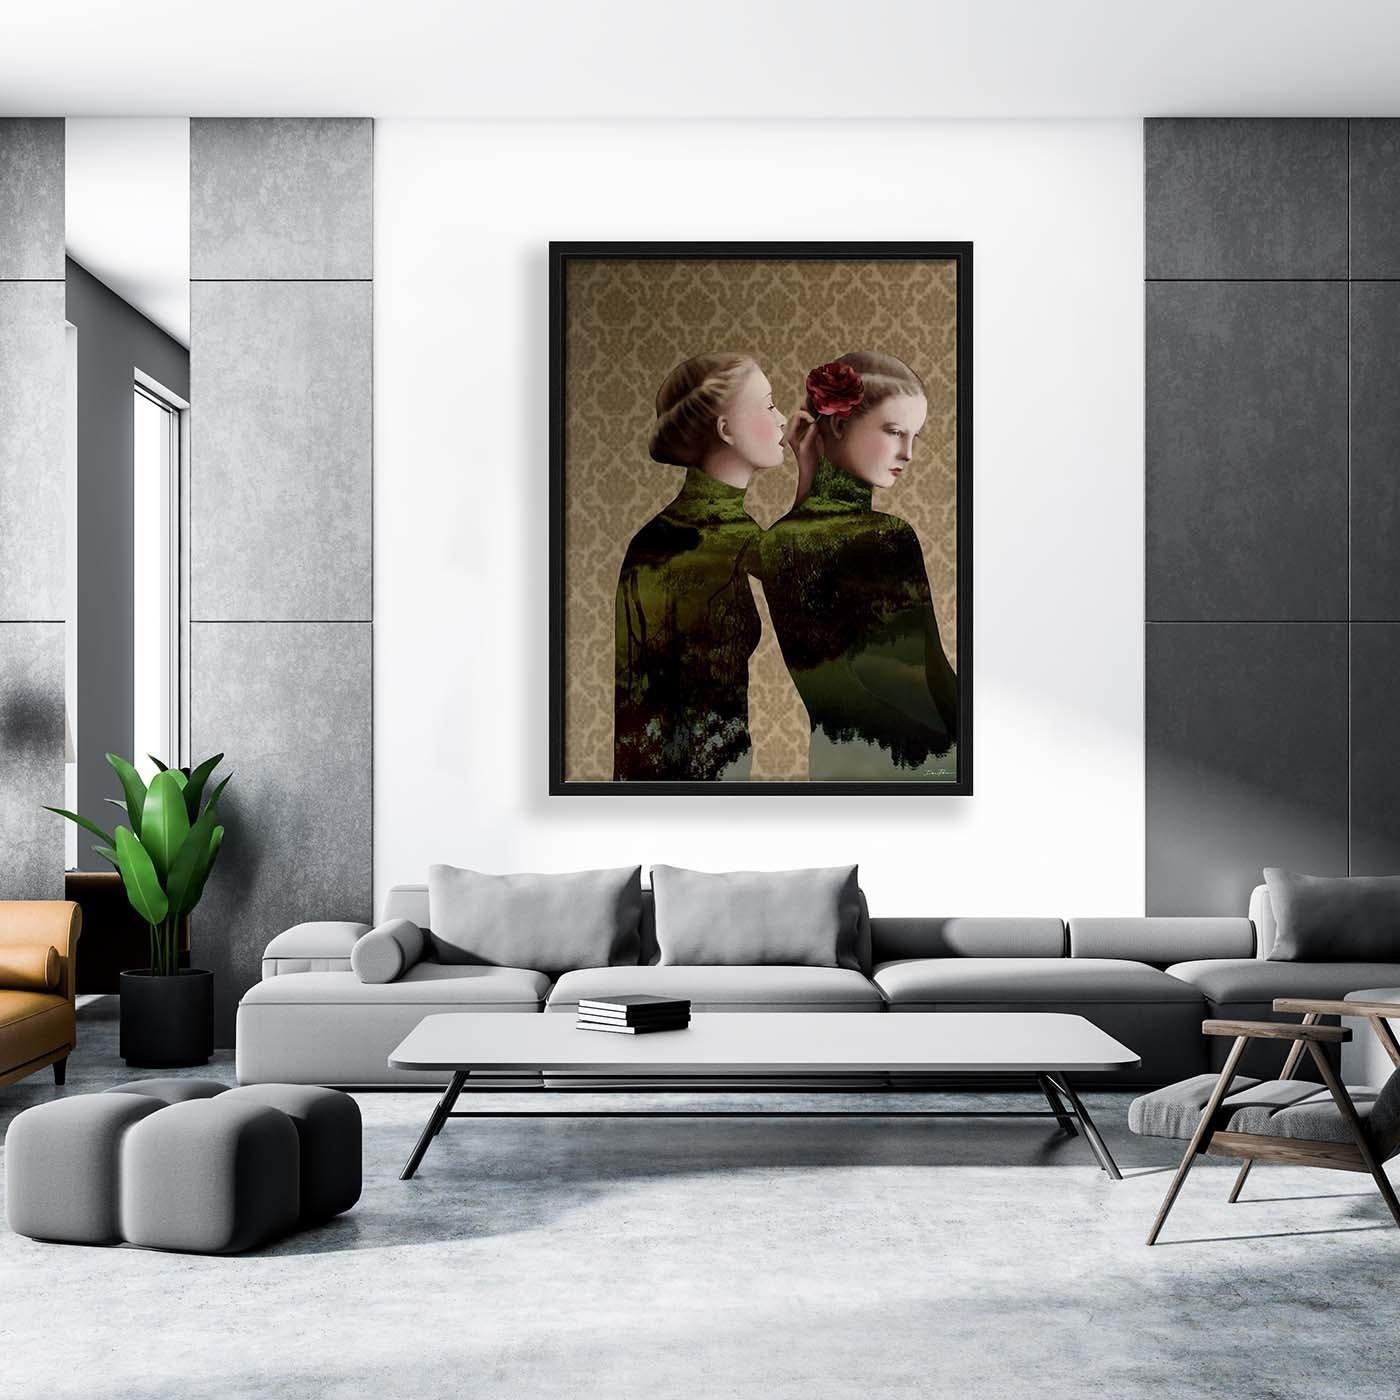 This Limited Edition, Pop-Surrealist digital artwork is made by assembling photographs and illustrations into a collage. This sensual piece features two elegant, identically dressed women, one of whom intimately whispers into the ear of the other.